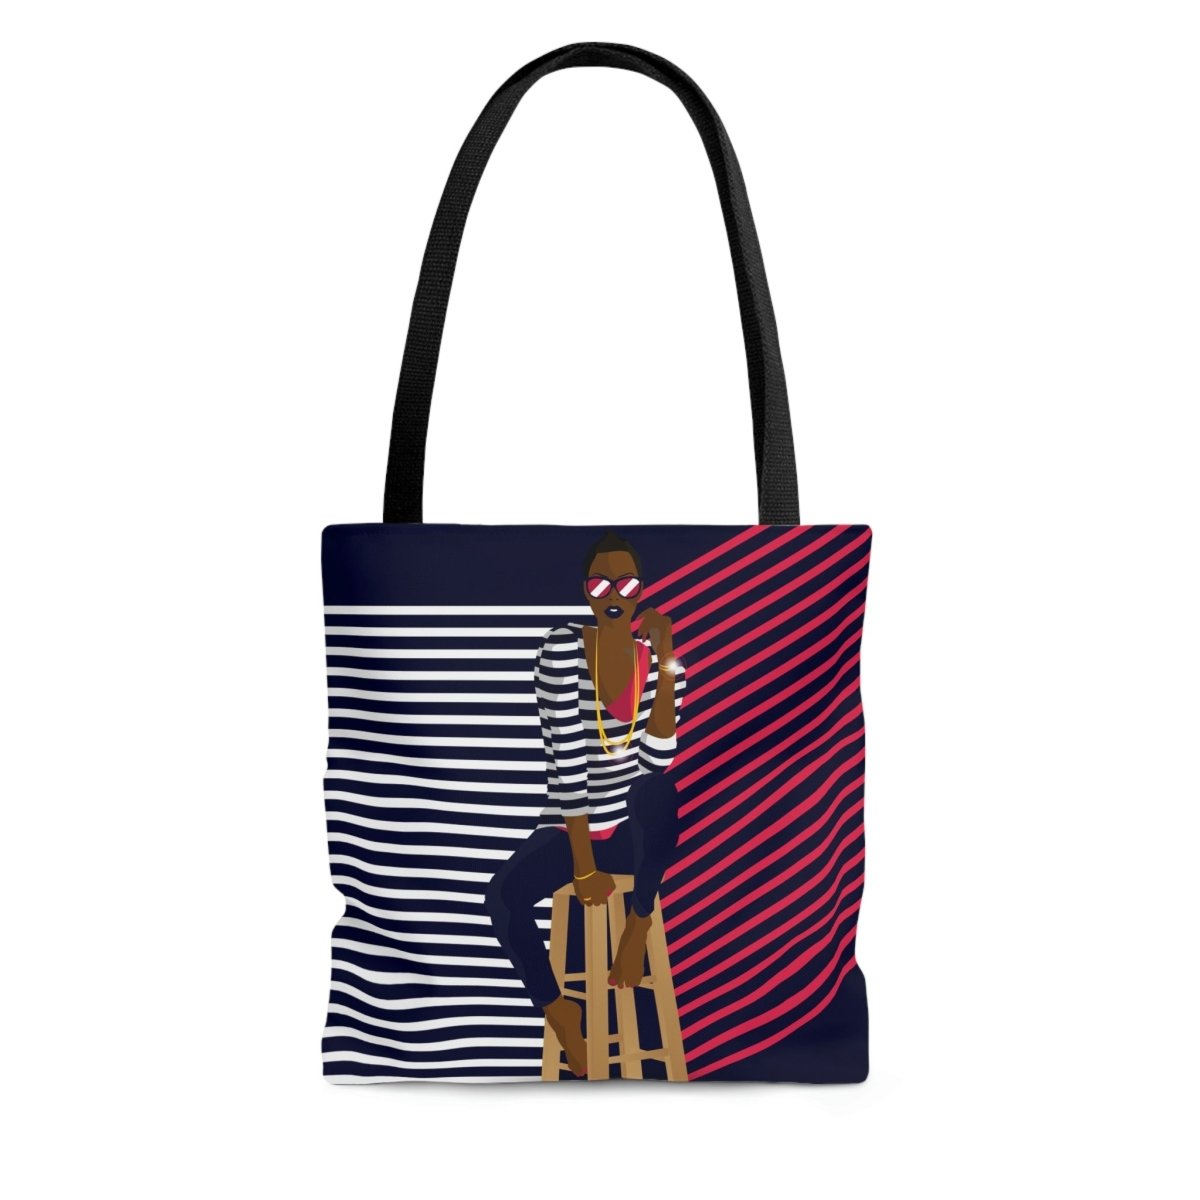 Lined Woman Tote Bag - The Trini Gee